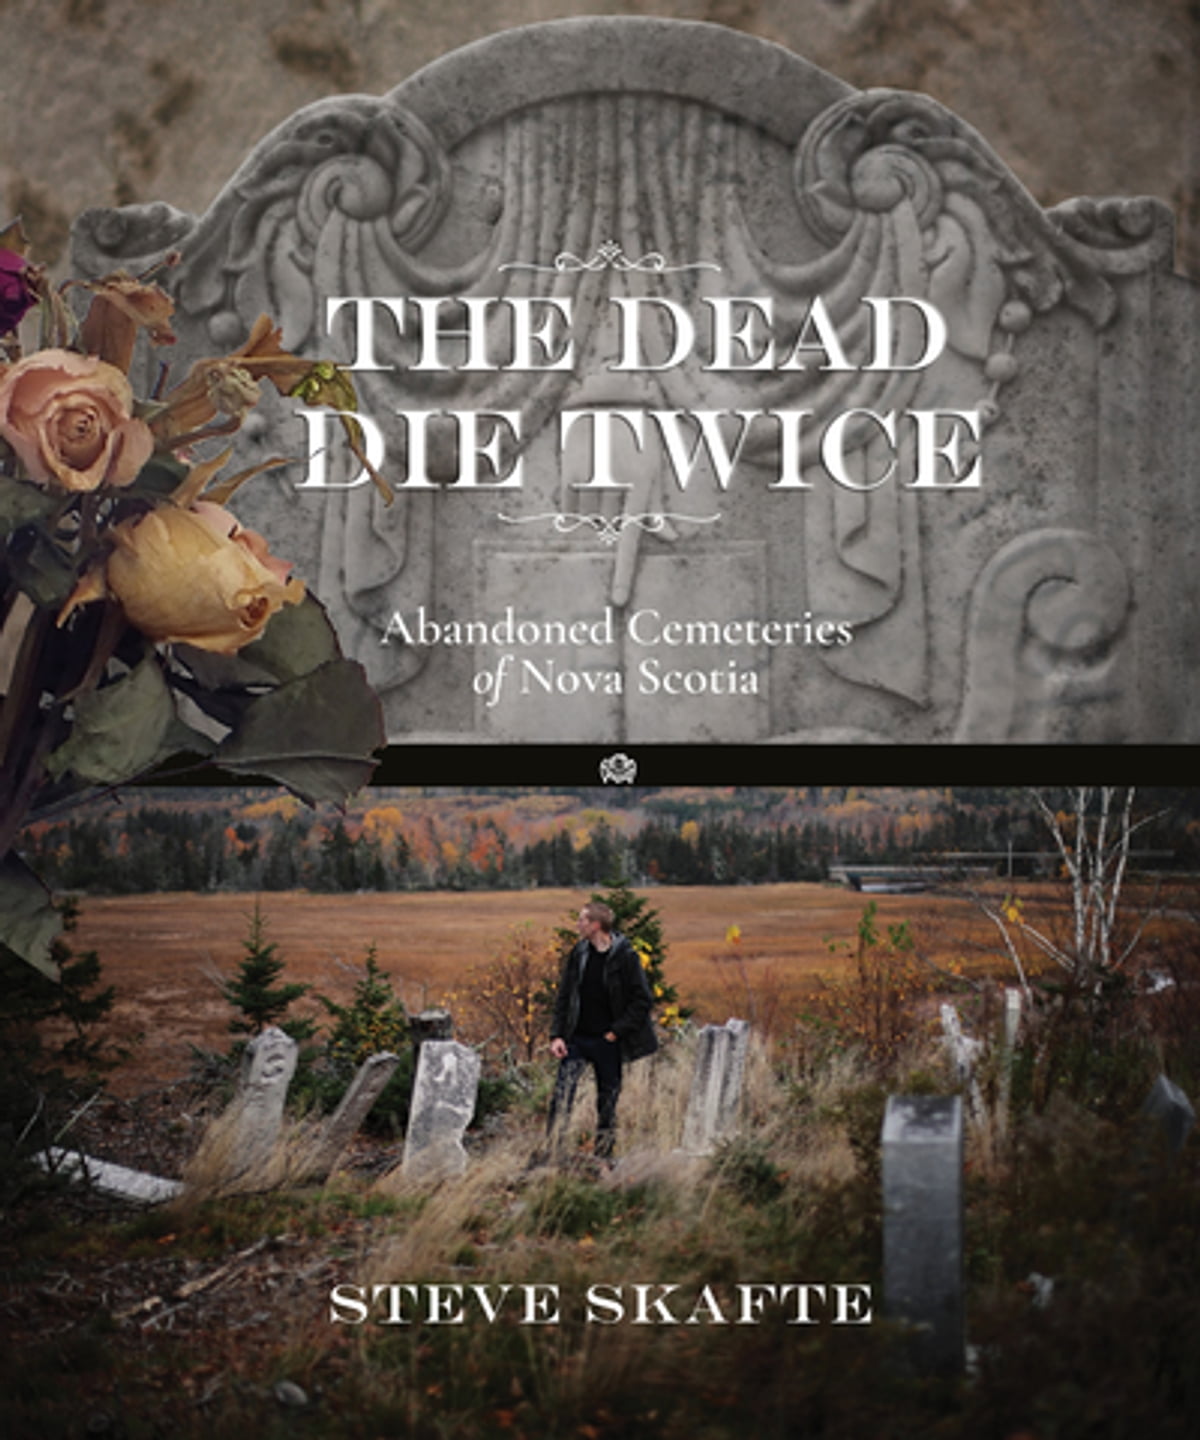 The people you find in lost graveyards: review of The Dead Die Twice